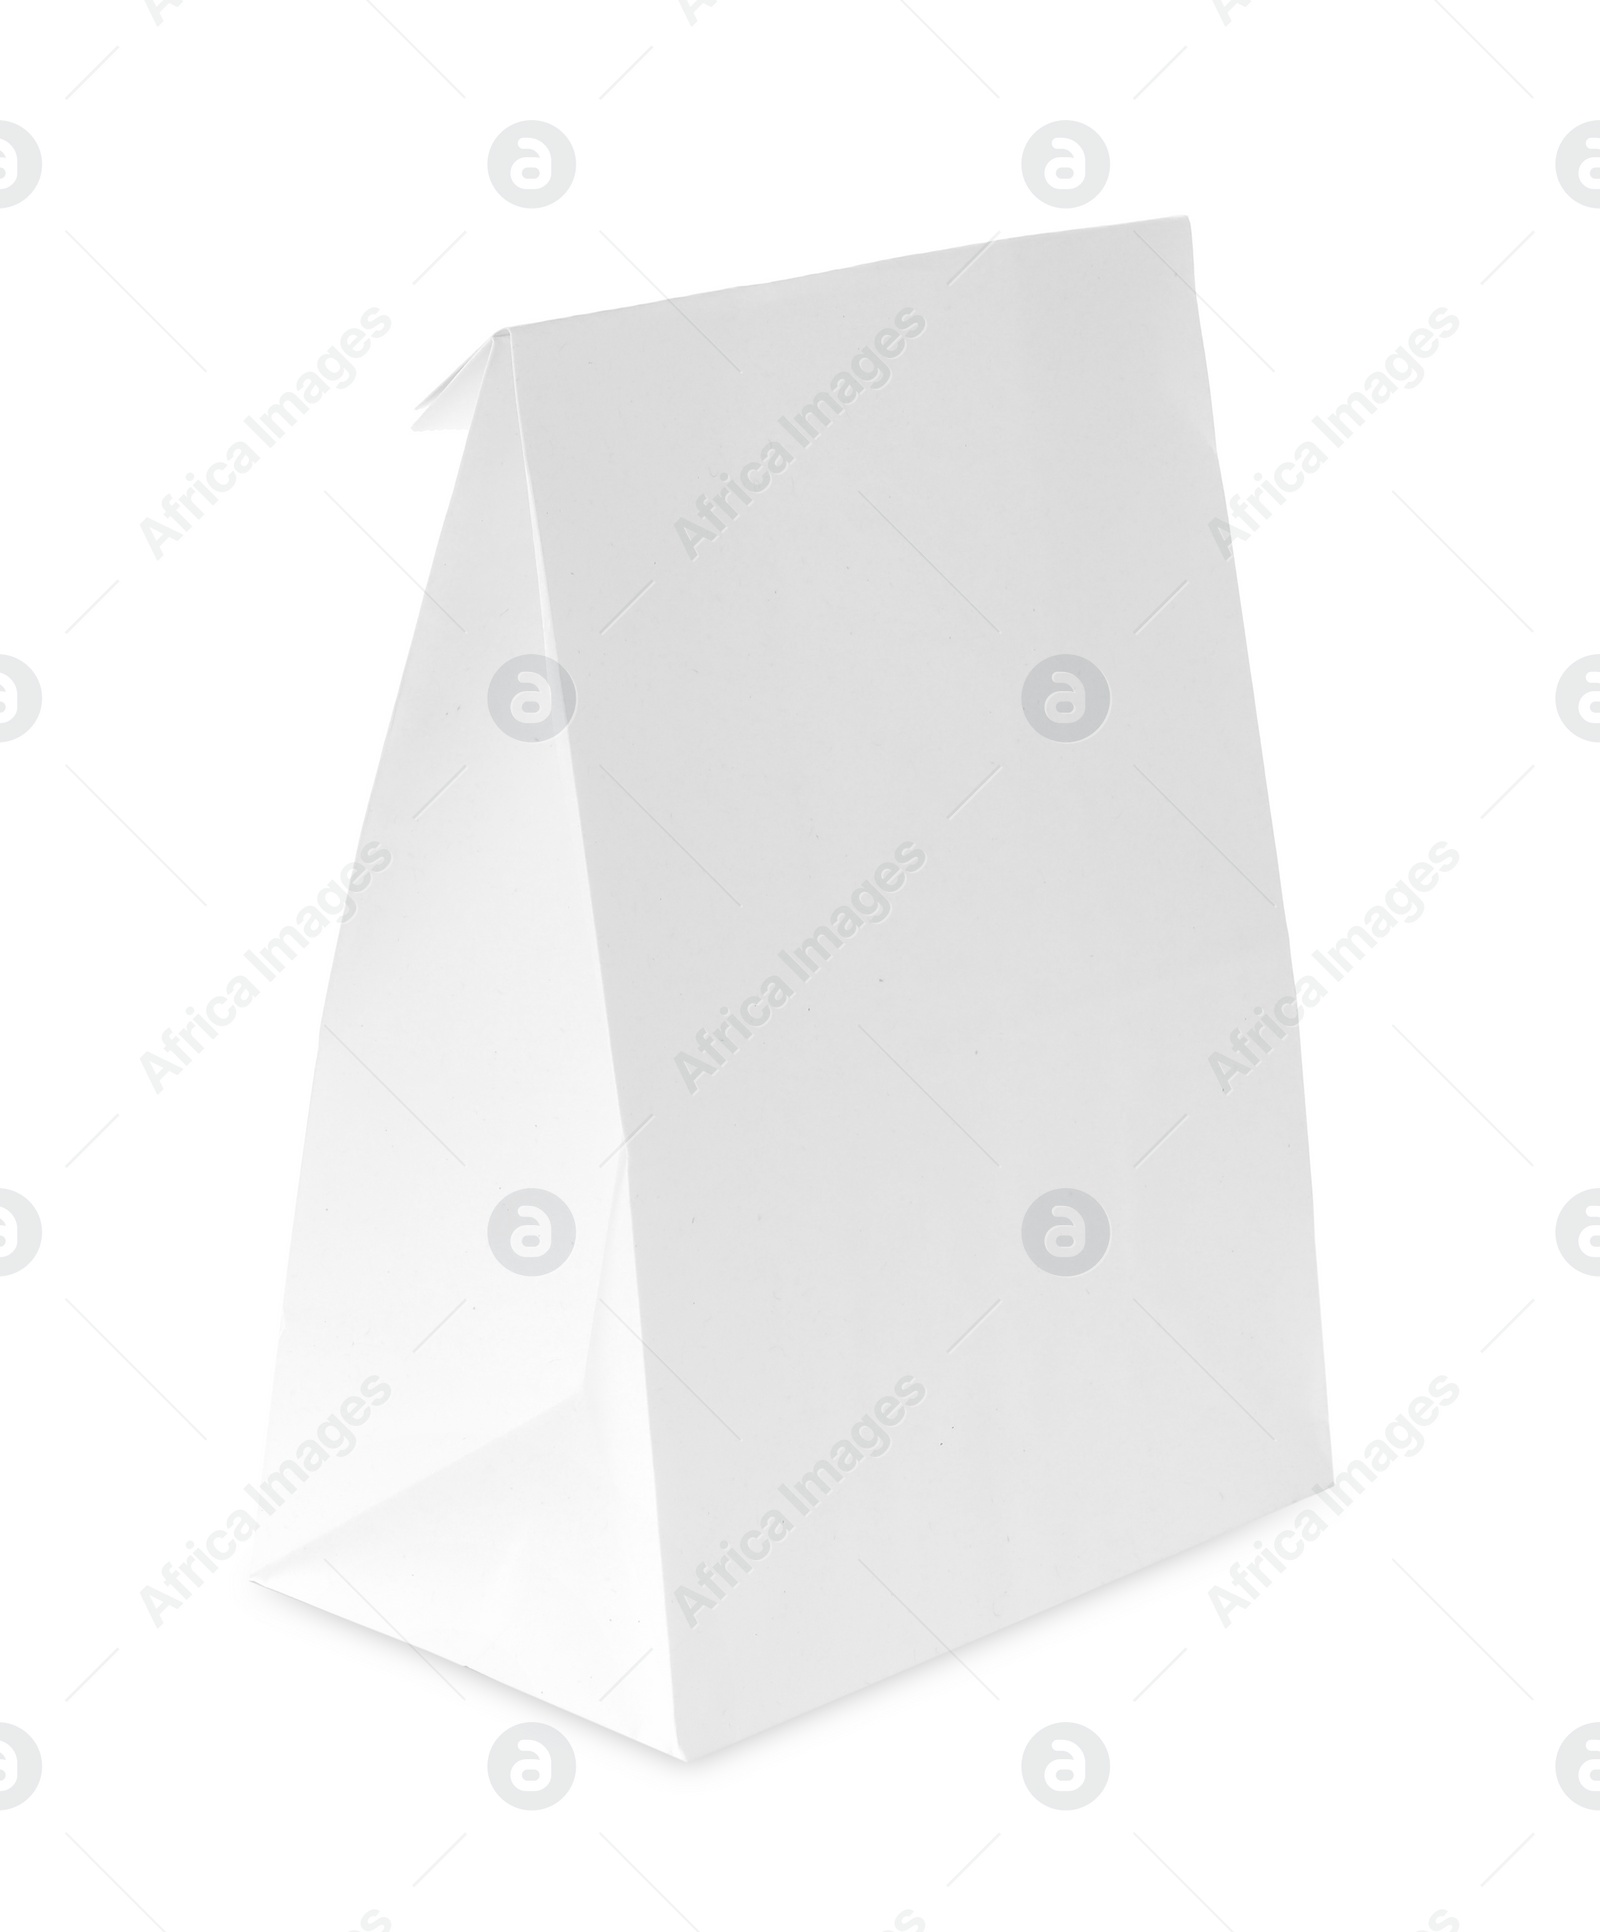 Photo of One new paper bag isolated on white